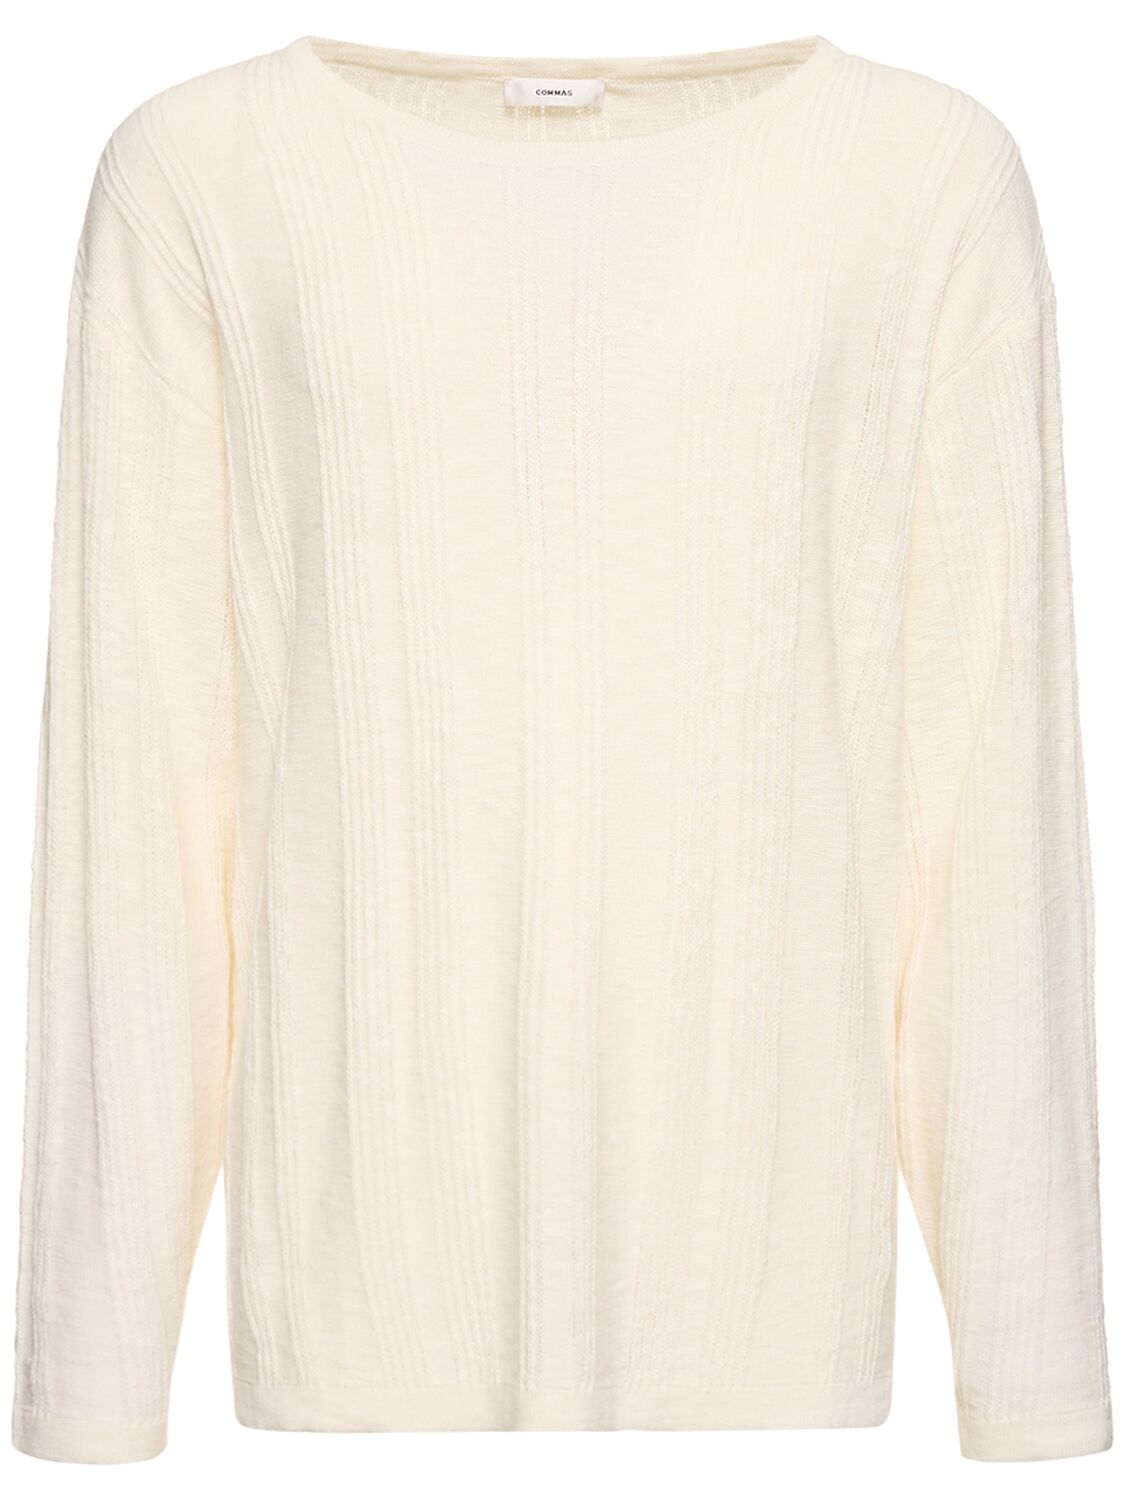 Commas Textured Knit Jumper In Off-white